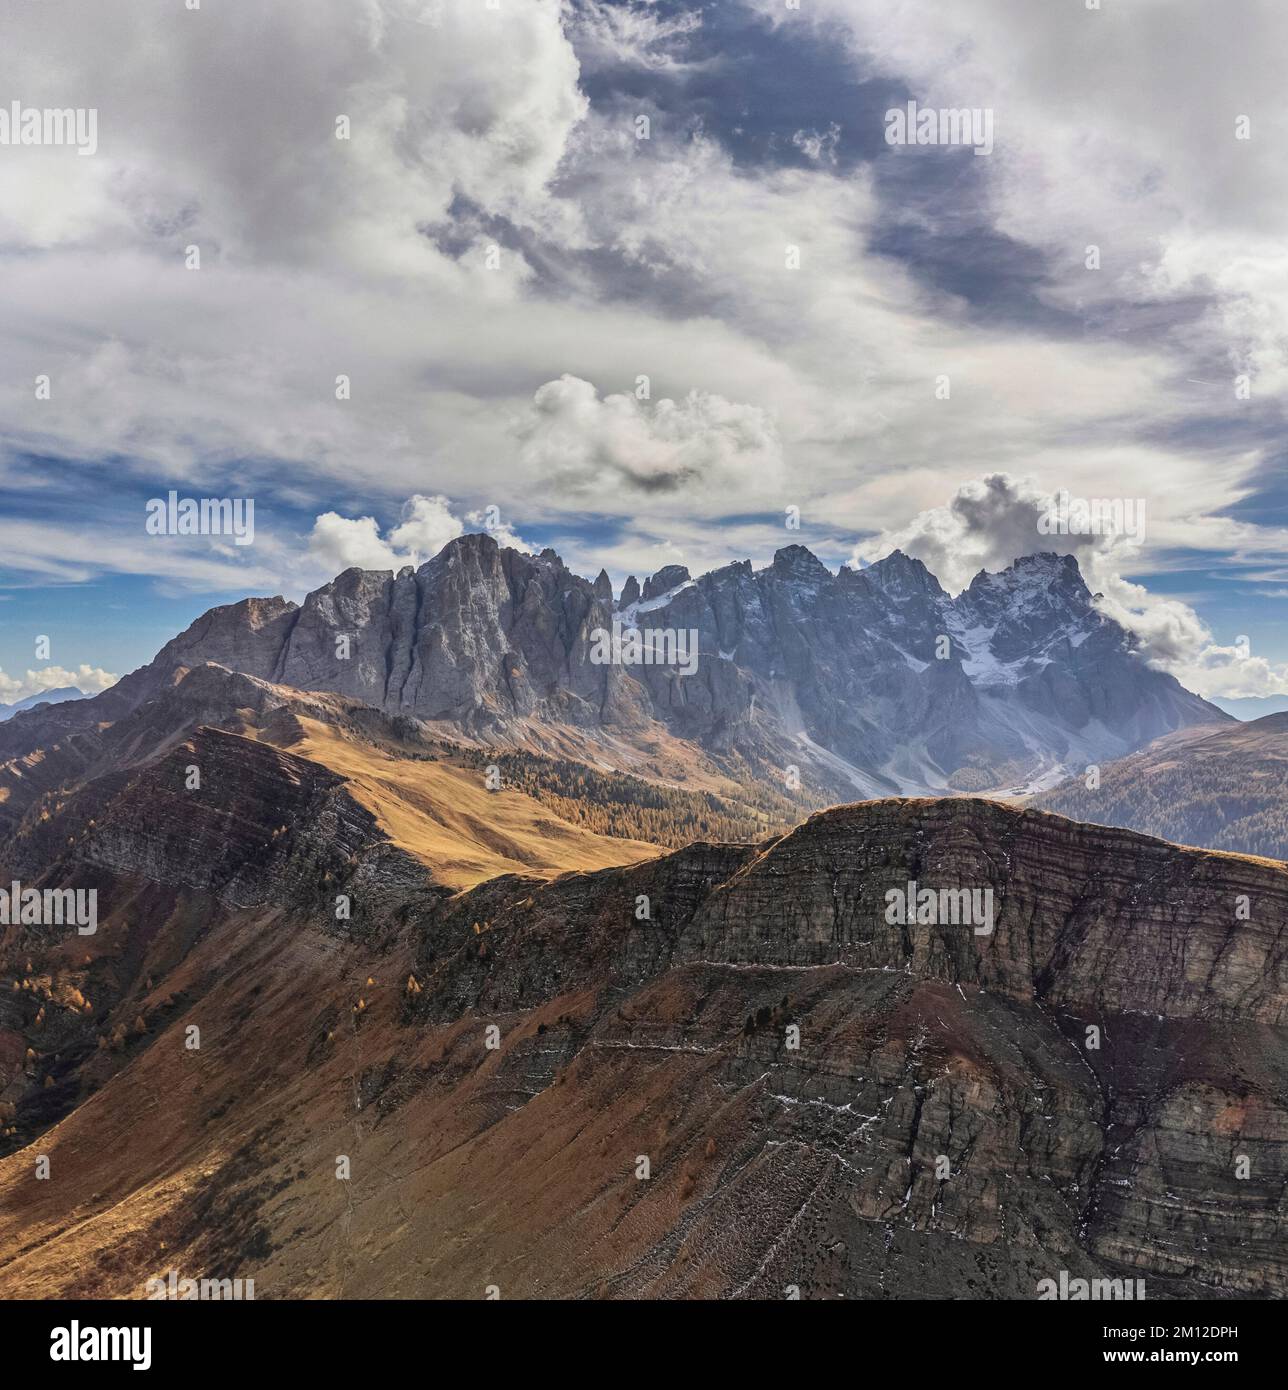 Italy, Trentino Alto Adige, province of Trento. Pale di San Martino / Pala group as seen from Valles pass, Dolomites Stock Photo